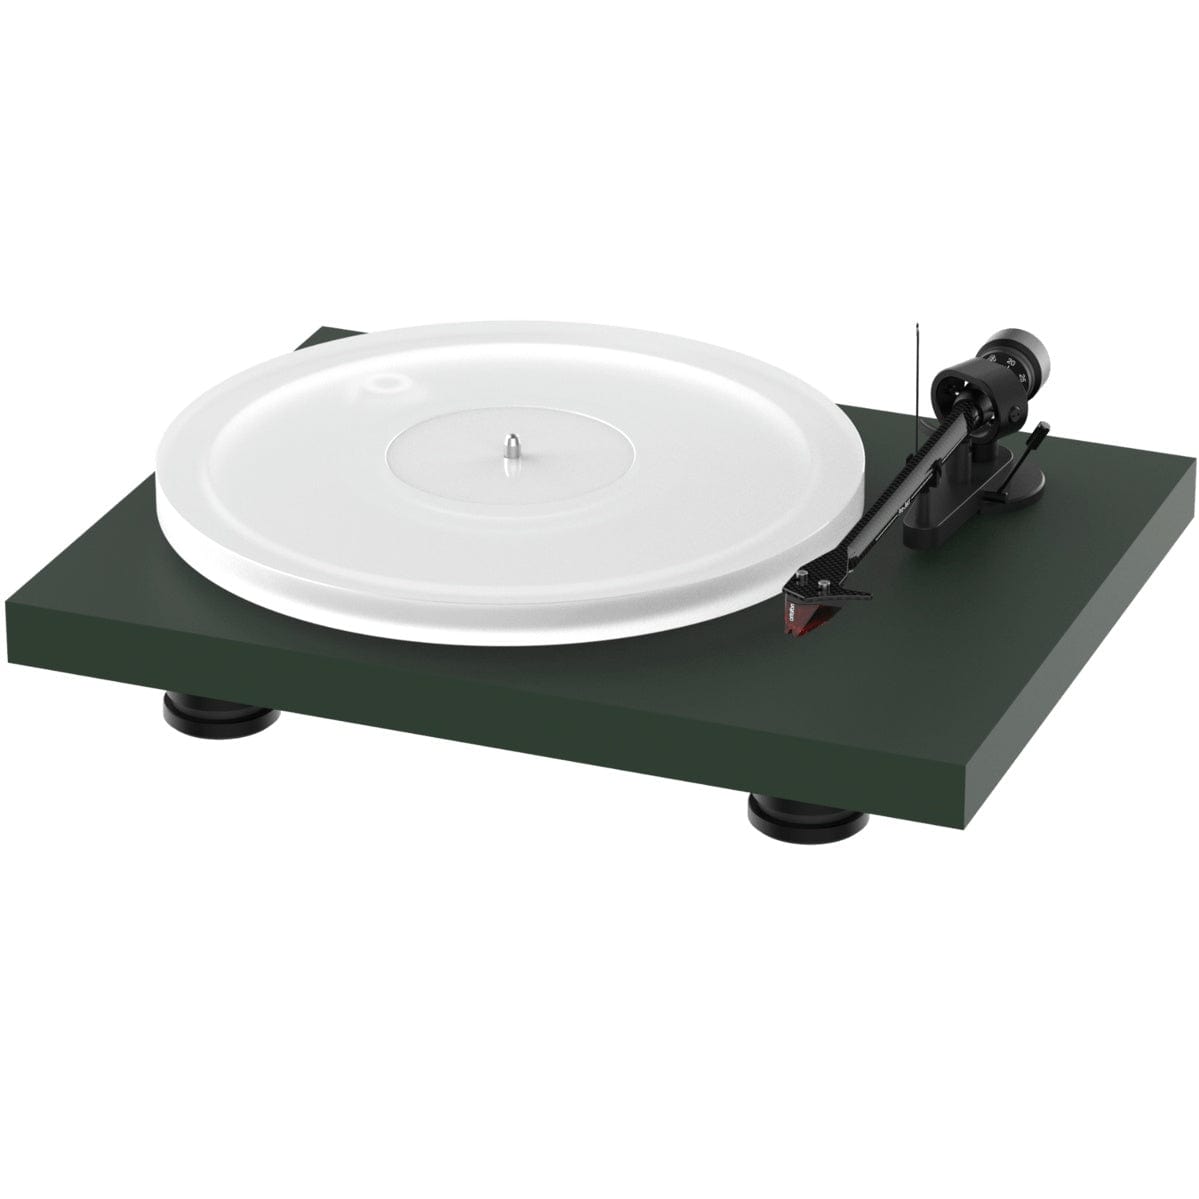 Pro-Ject Pro-Ject Debut Carbon Evo Acrylic Turntable with Ortofon 2M Red Turntables